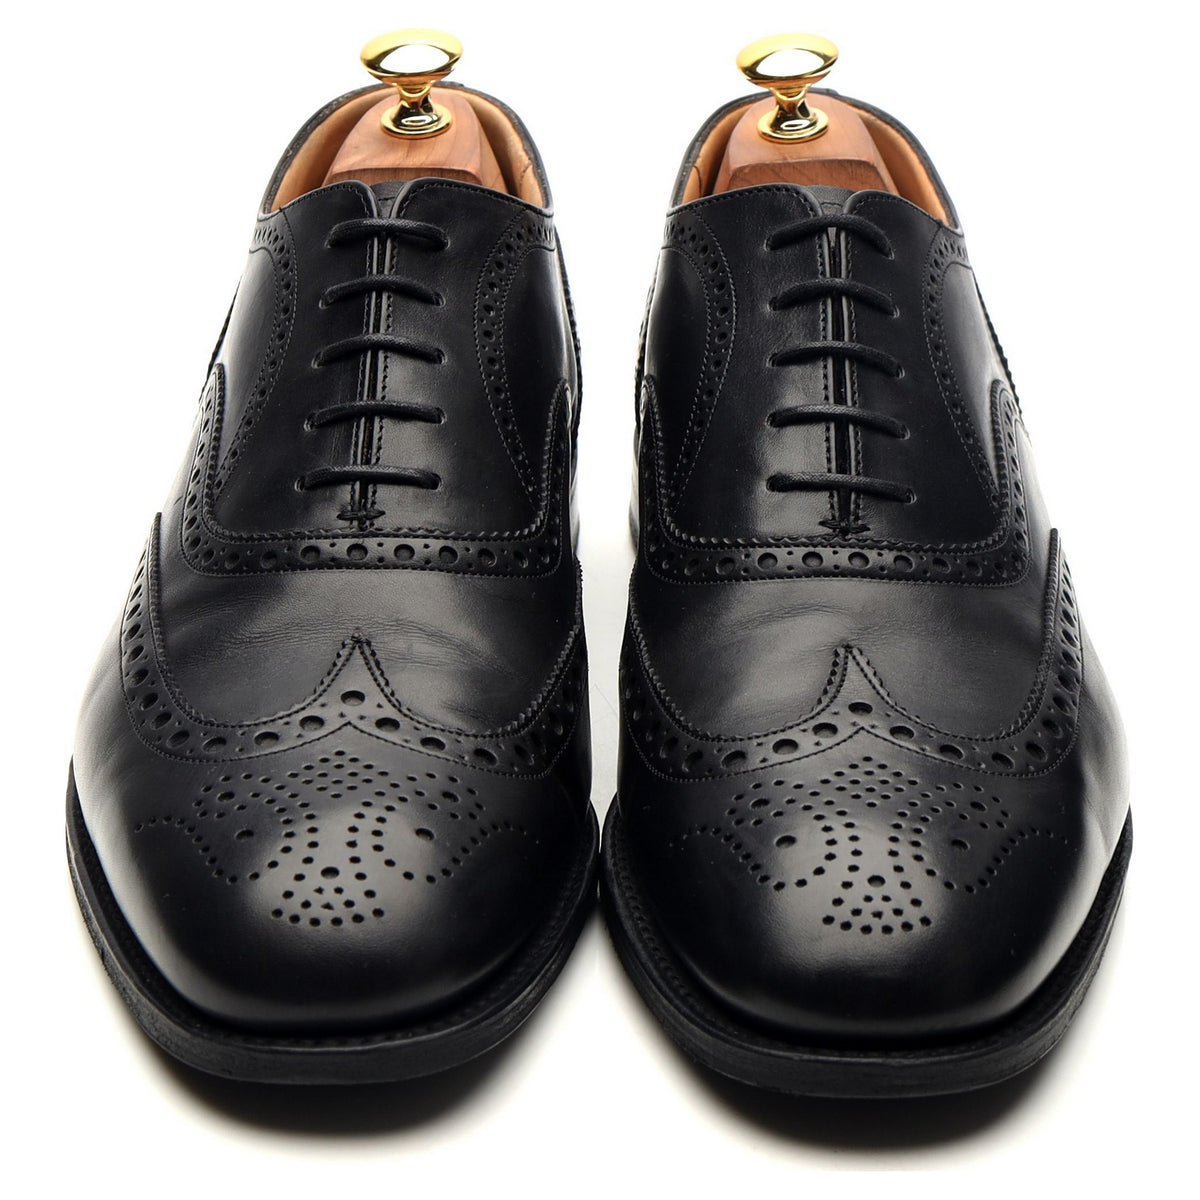 &#39;Tarvin&#39; Black Leather Oxford Brogues UK 10 F